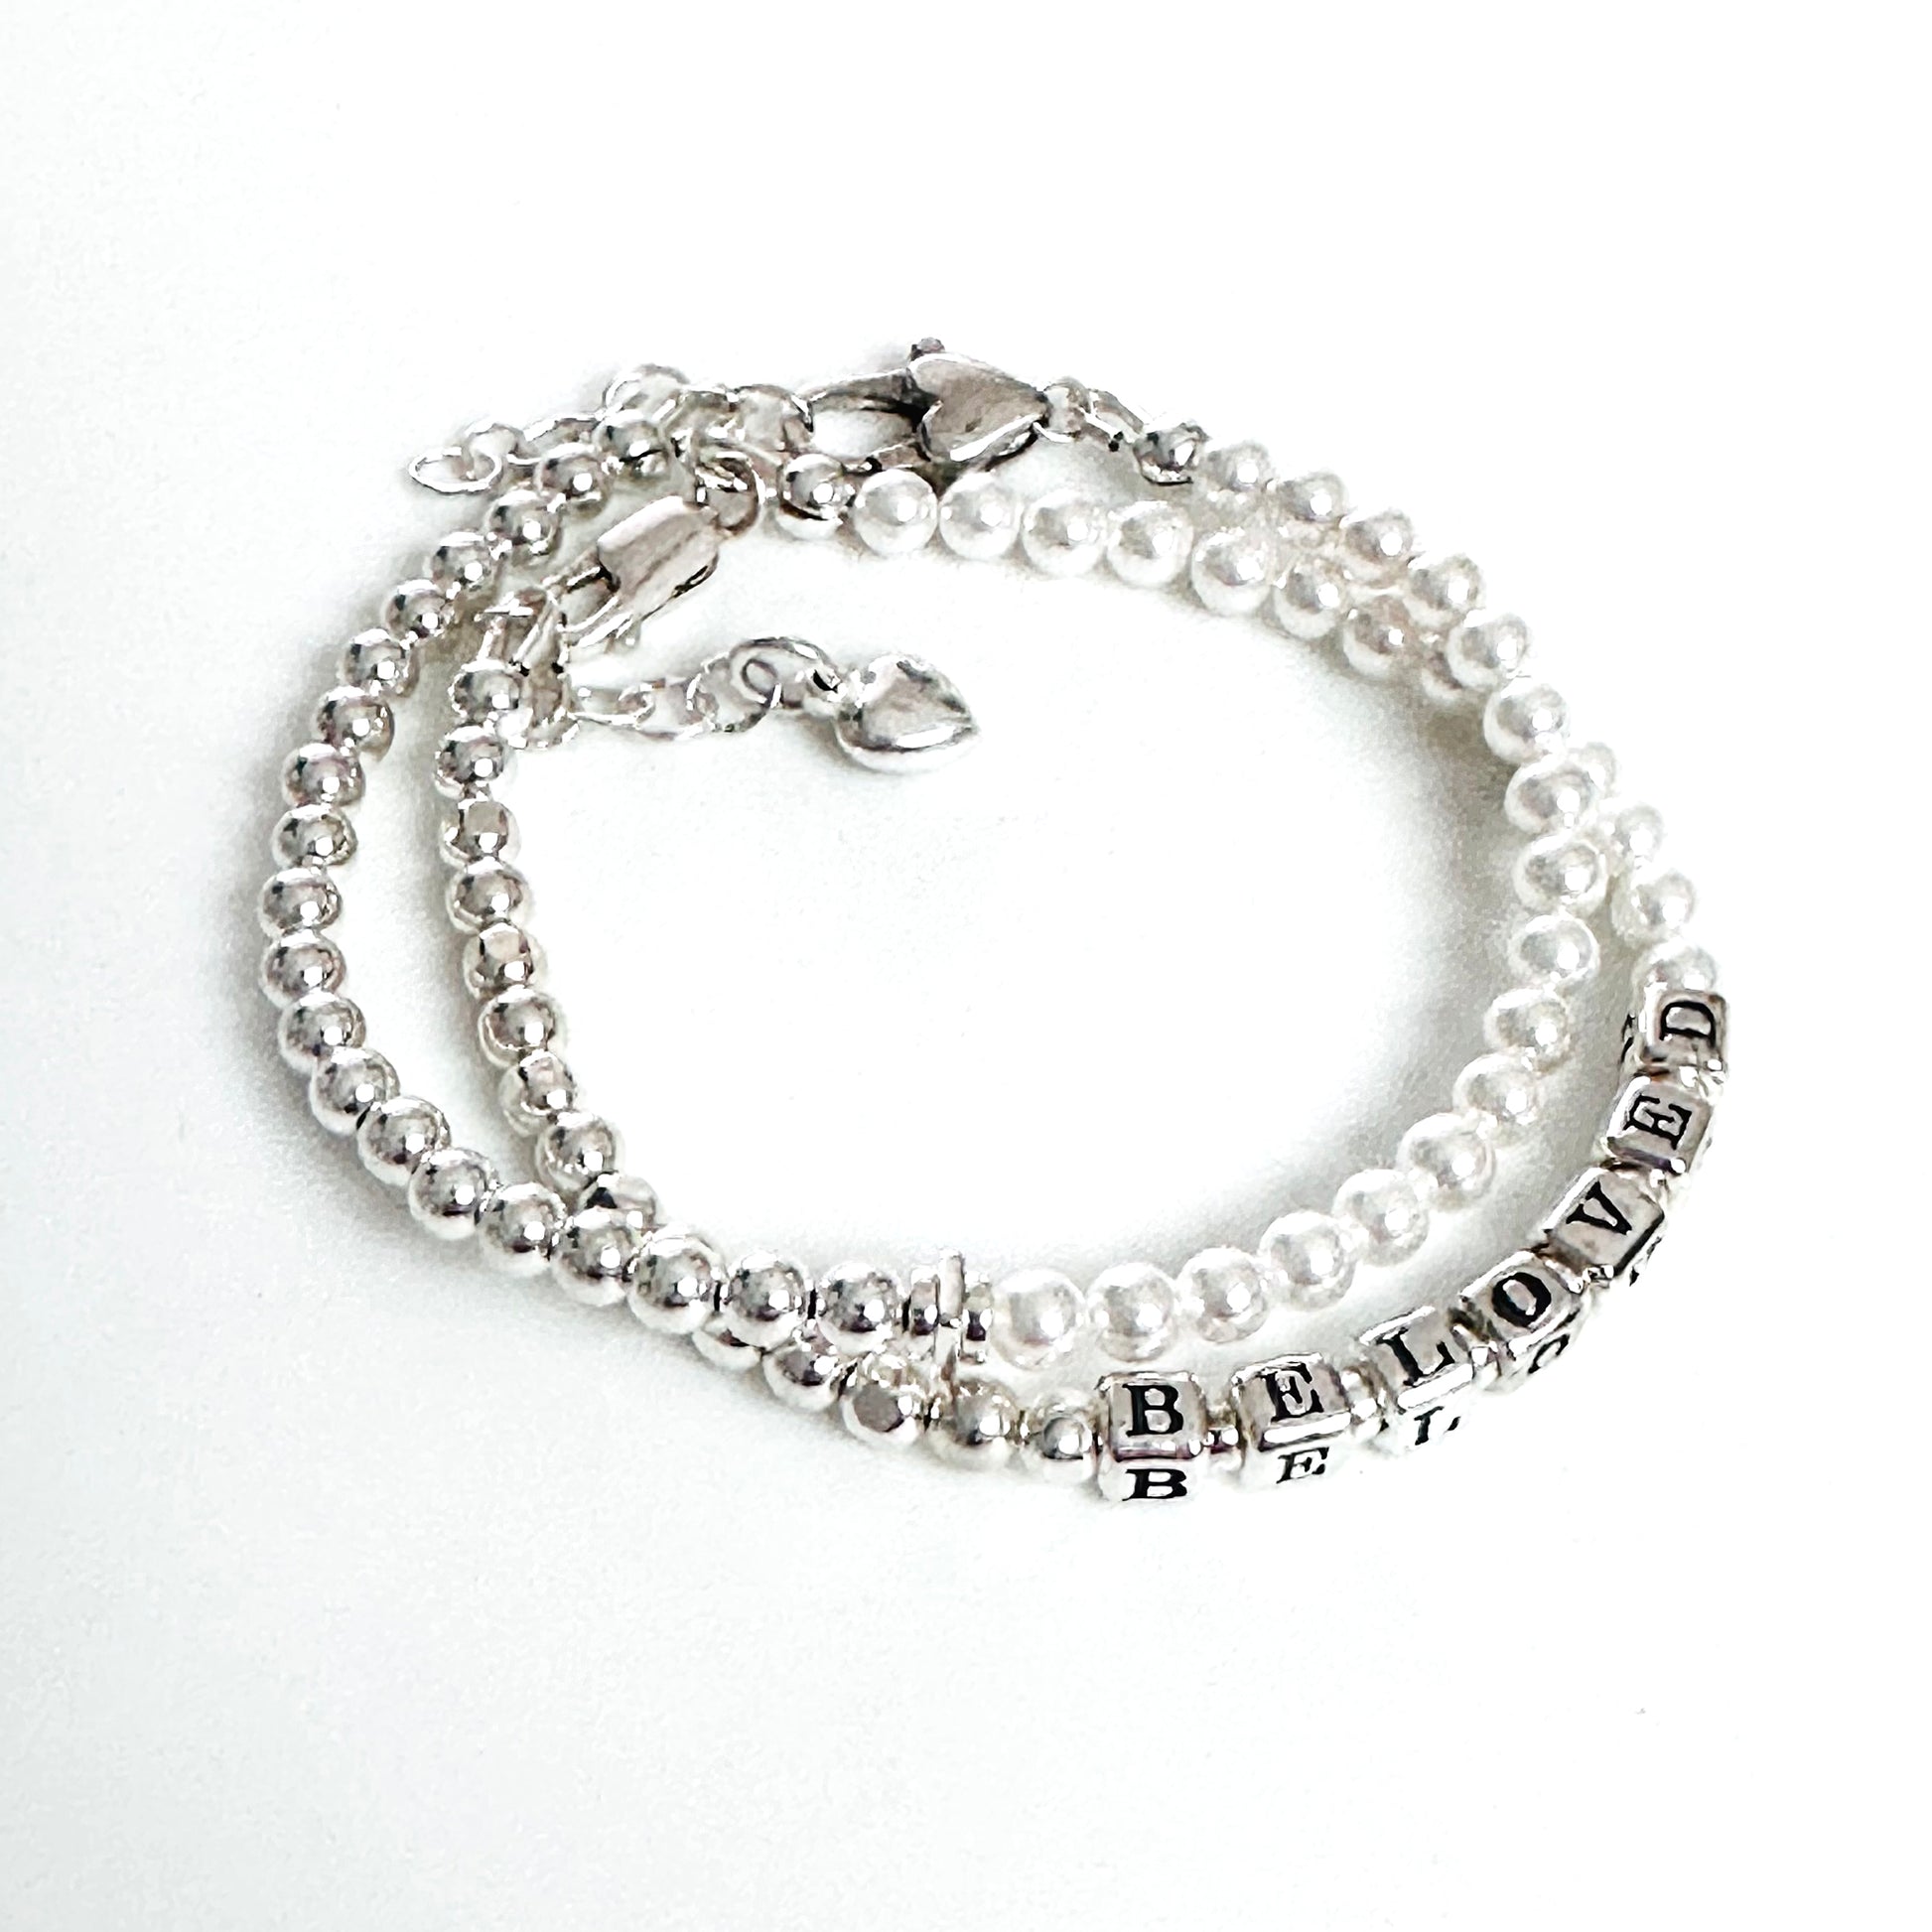 Love and Beloved Bracelet in sterling silver and pearls